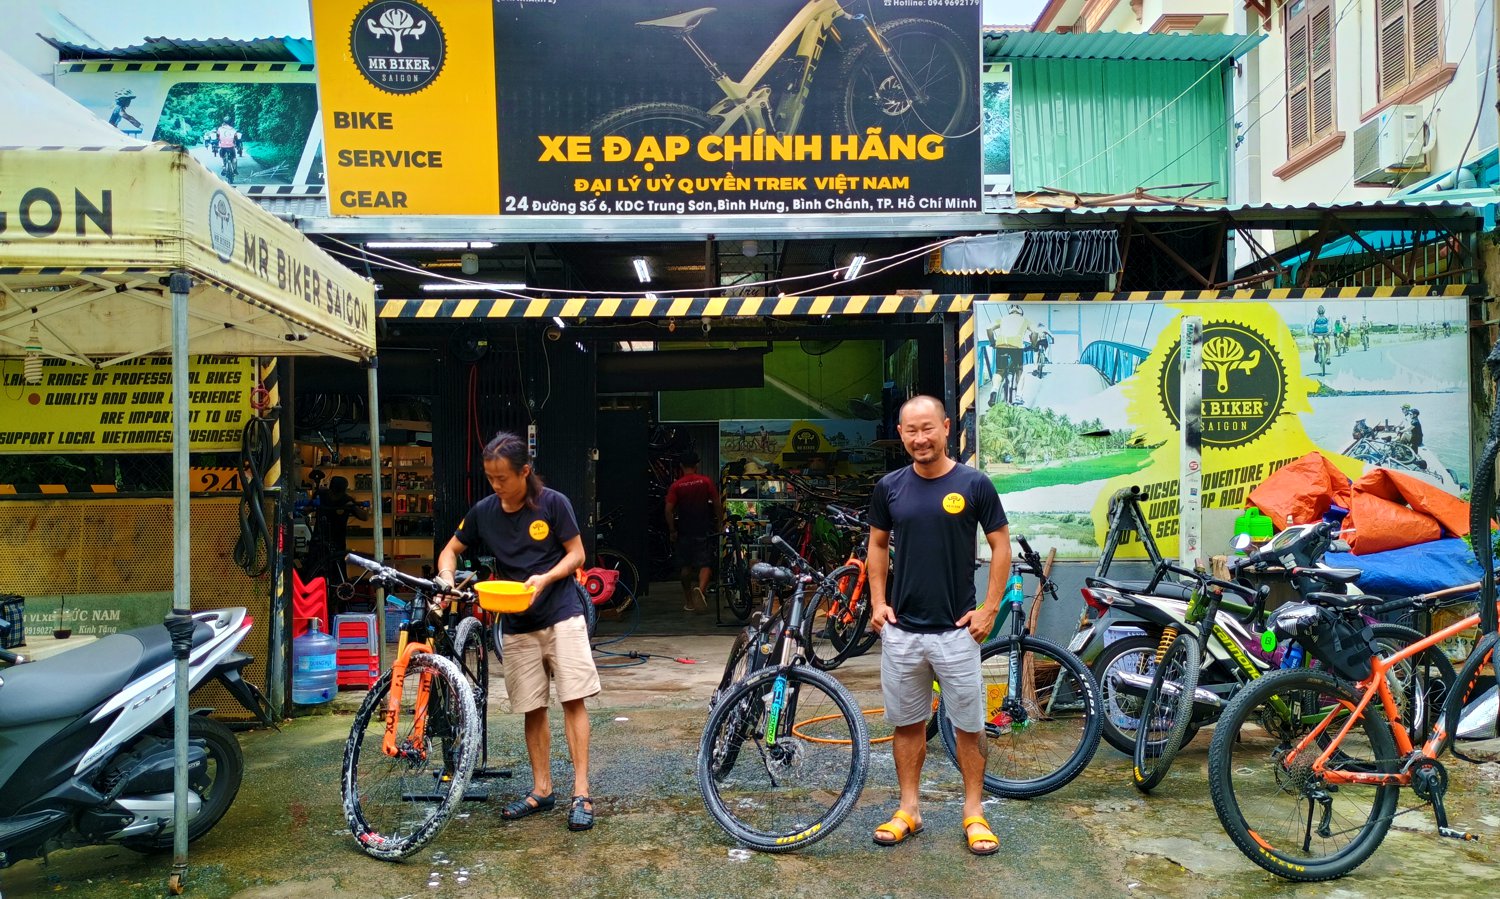 Experience the Ultimate Cycling Adventure in Vietnam with Mr. Biker Saigon!